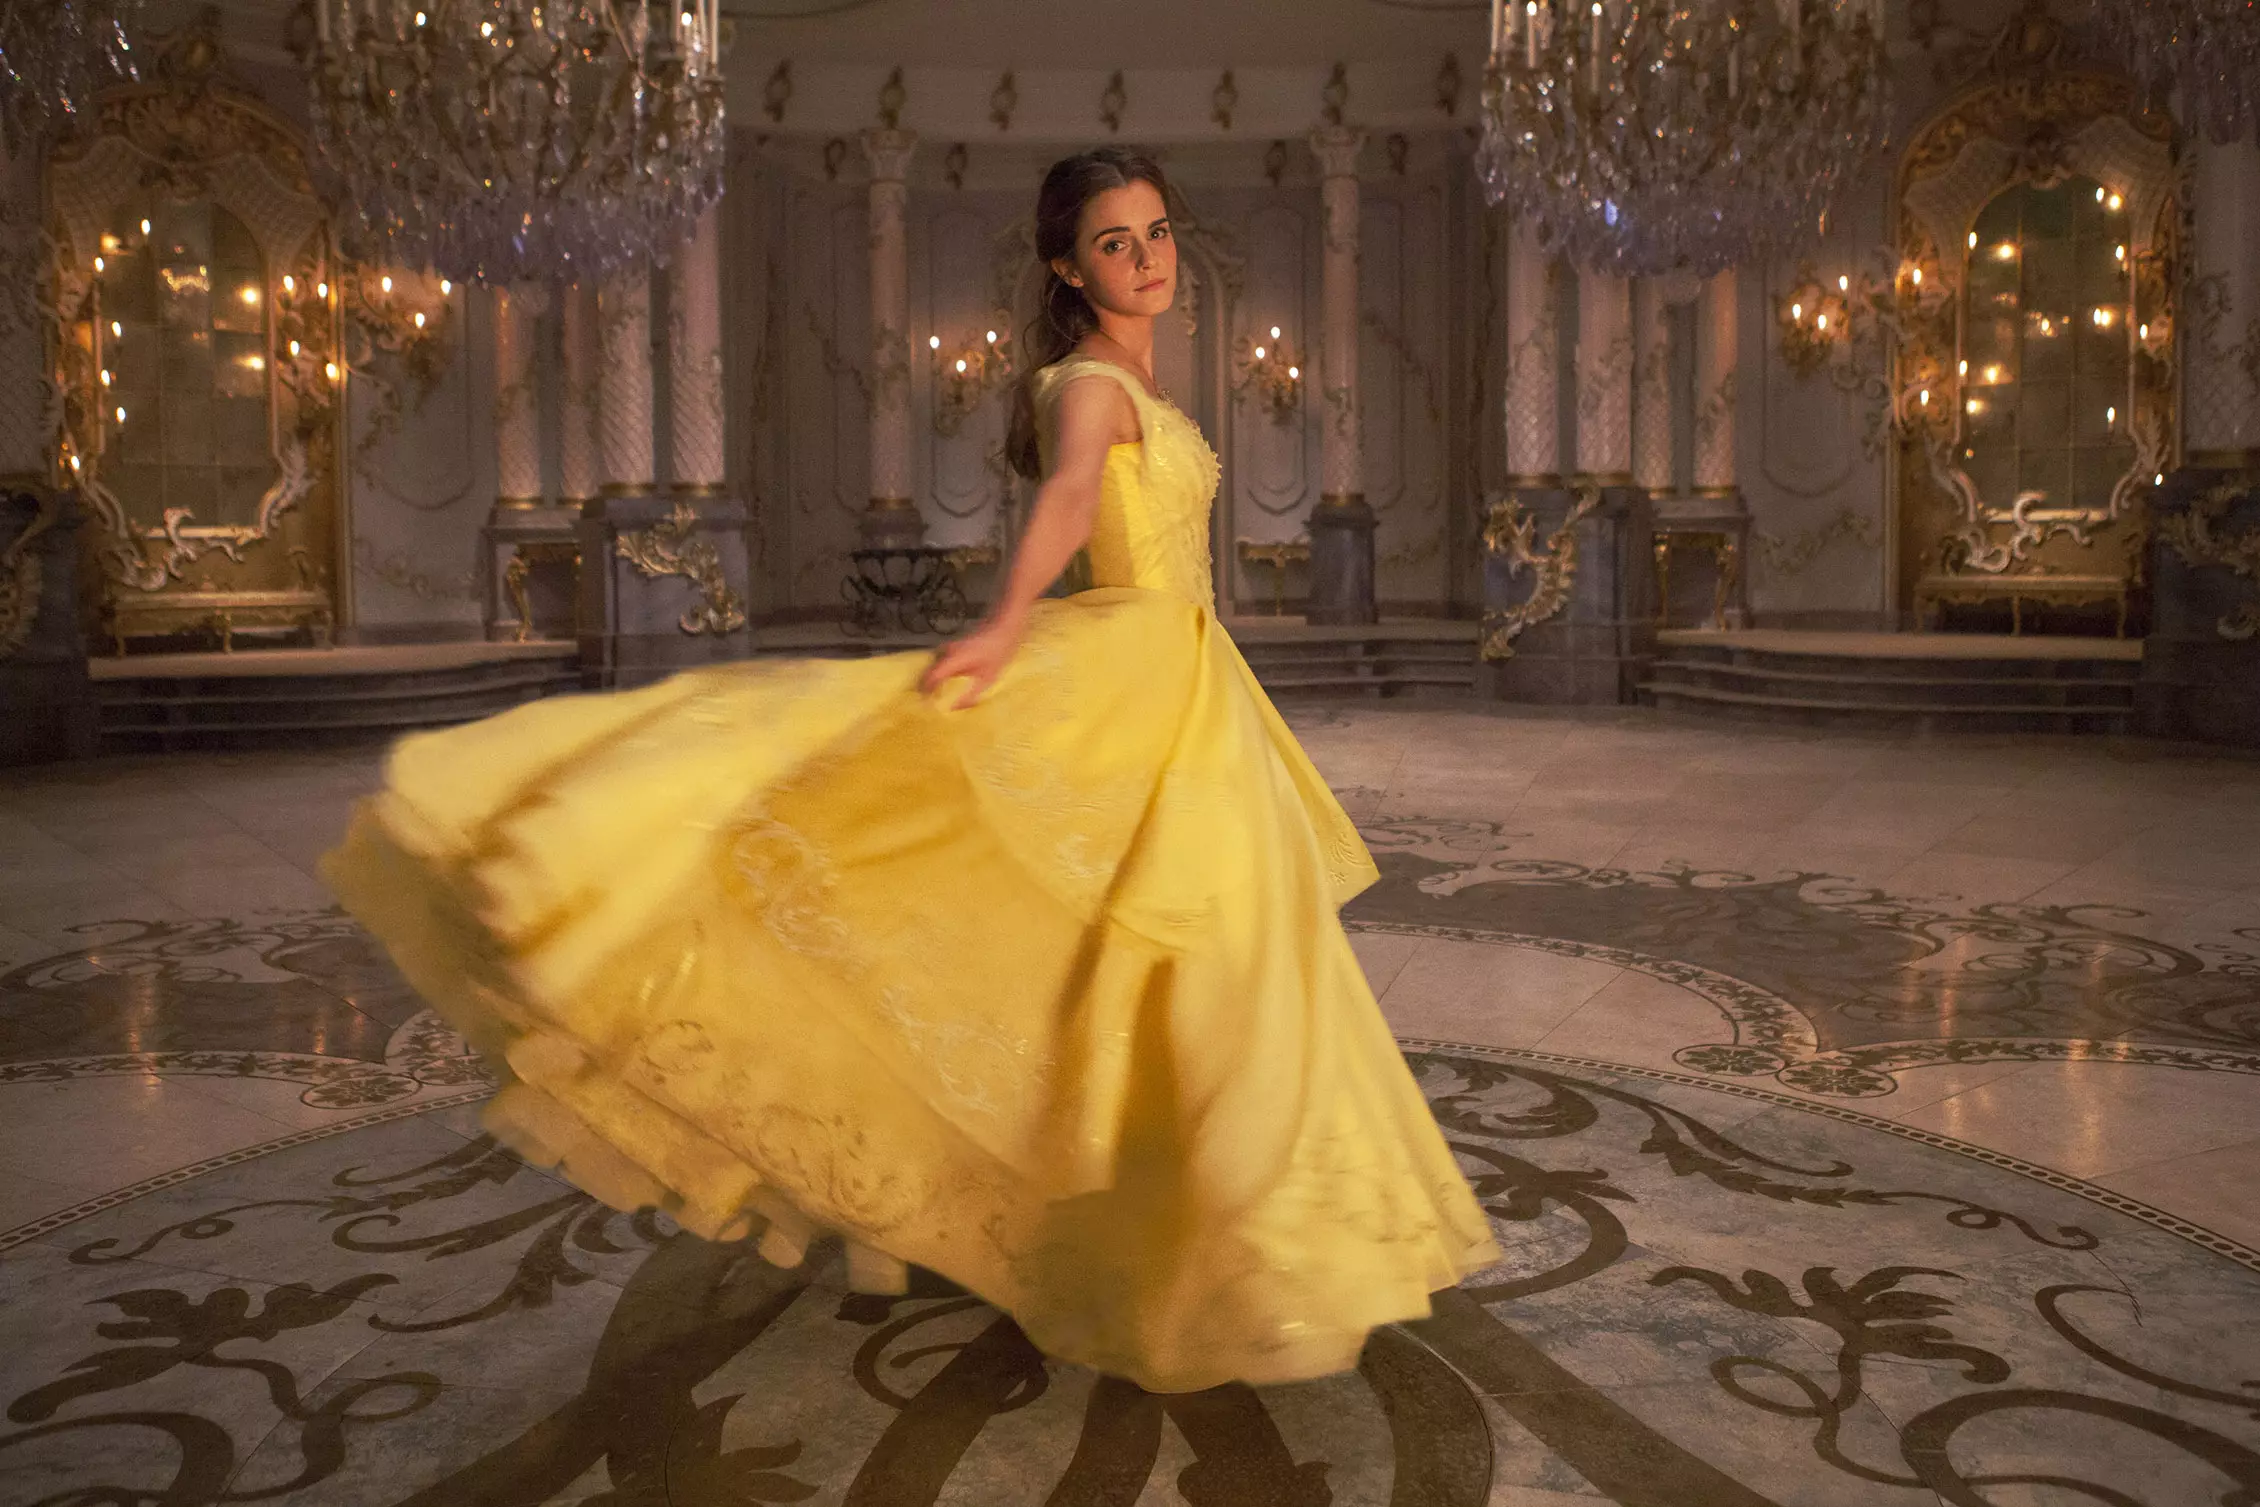 Emma Watson in the live-action 'Beauty and the Beast'.